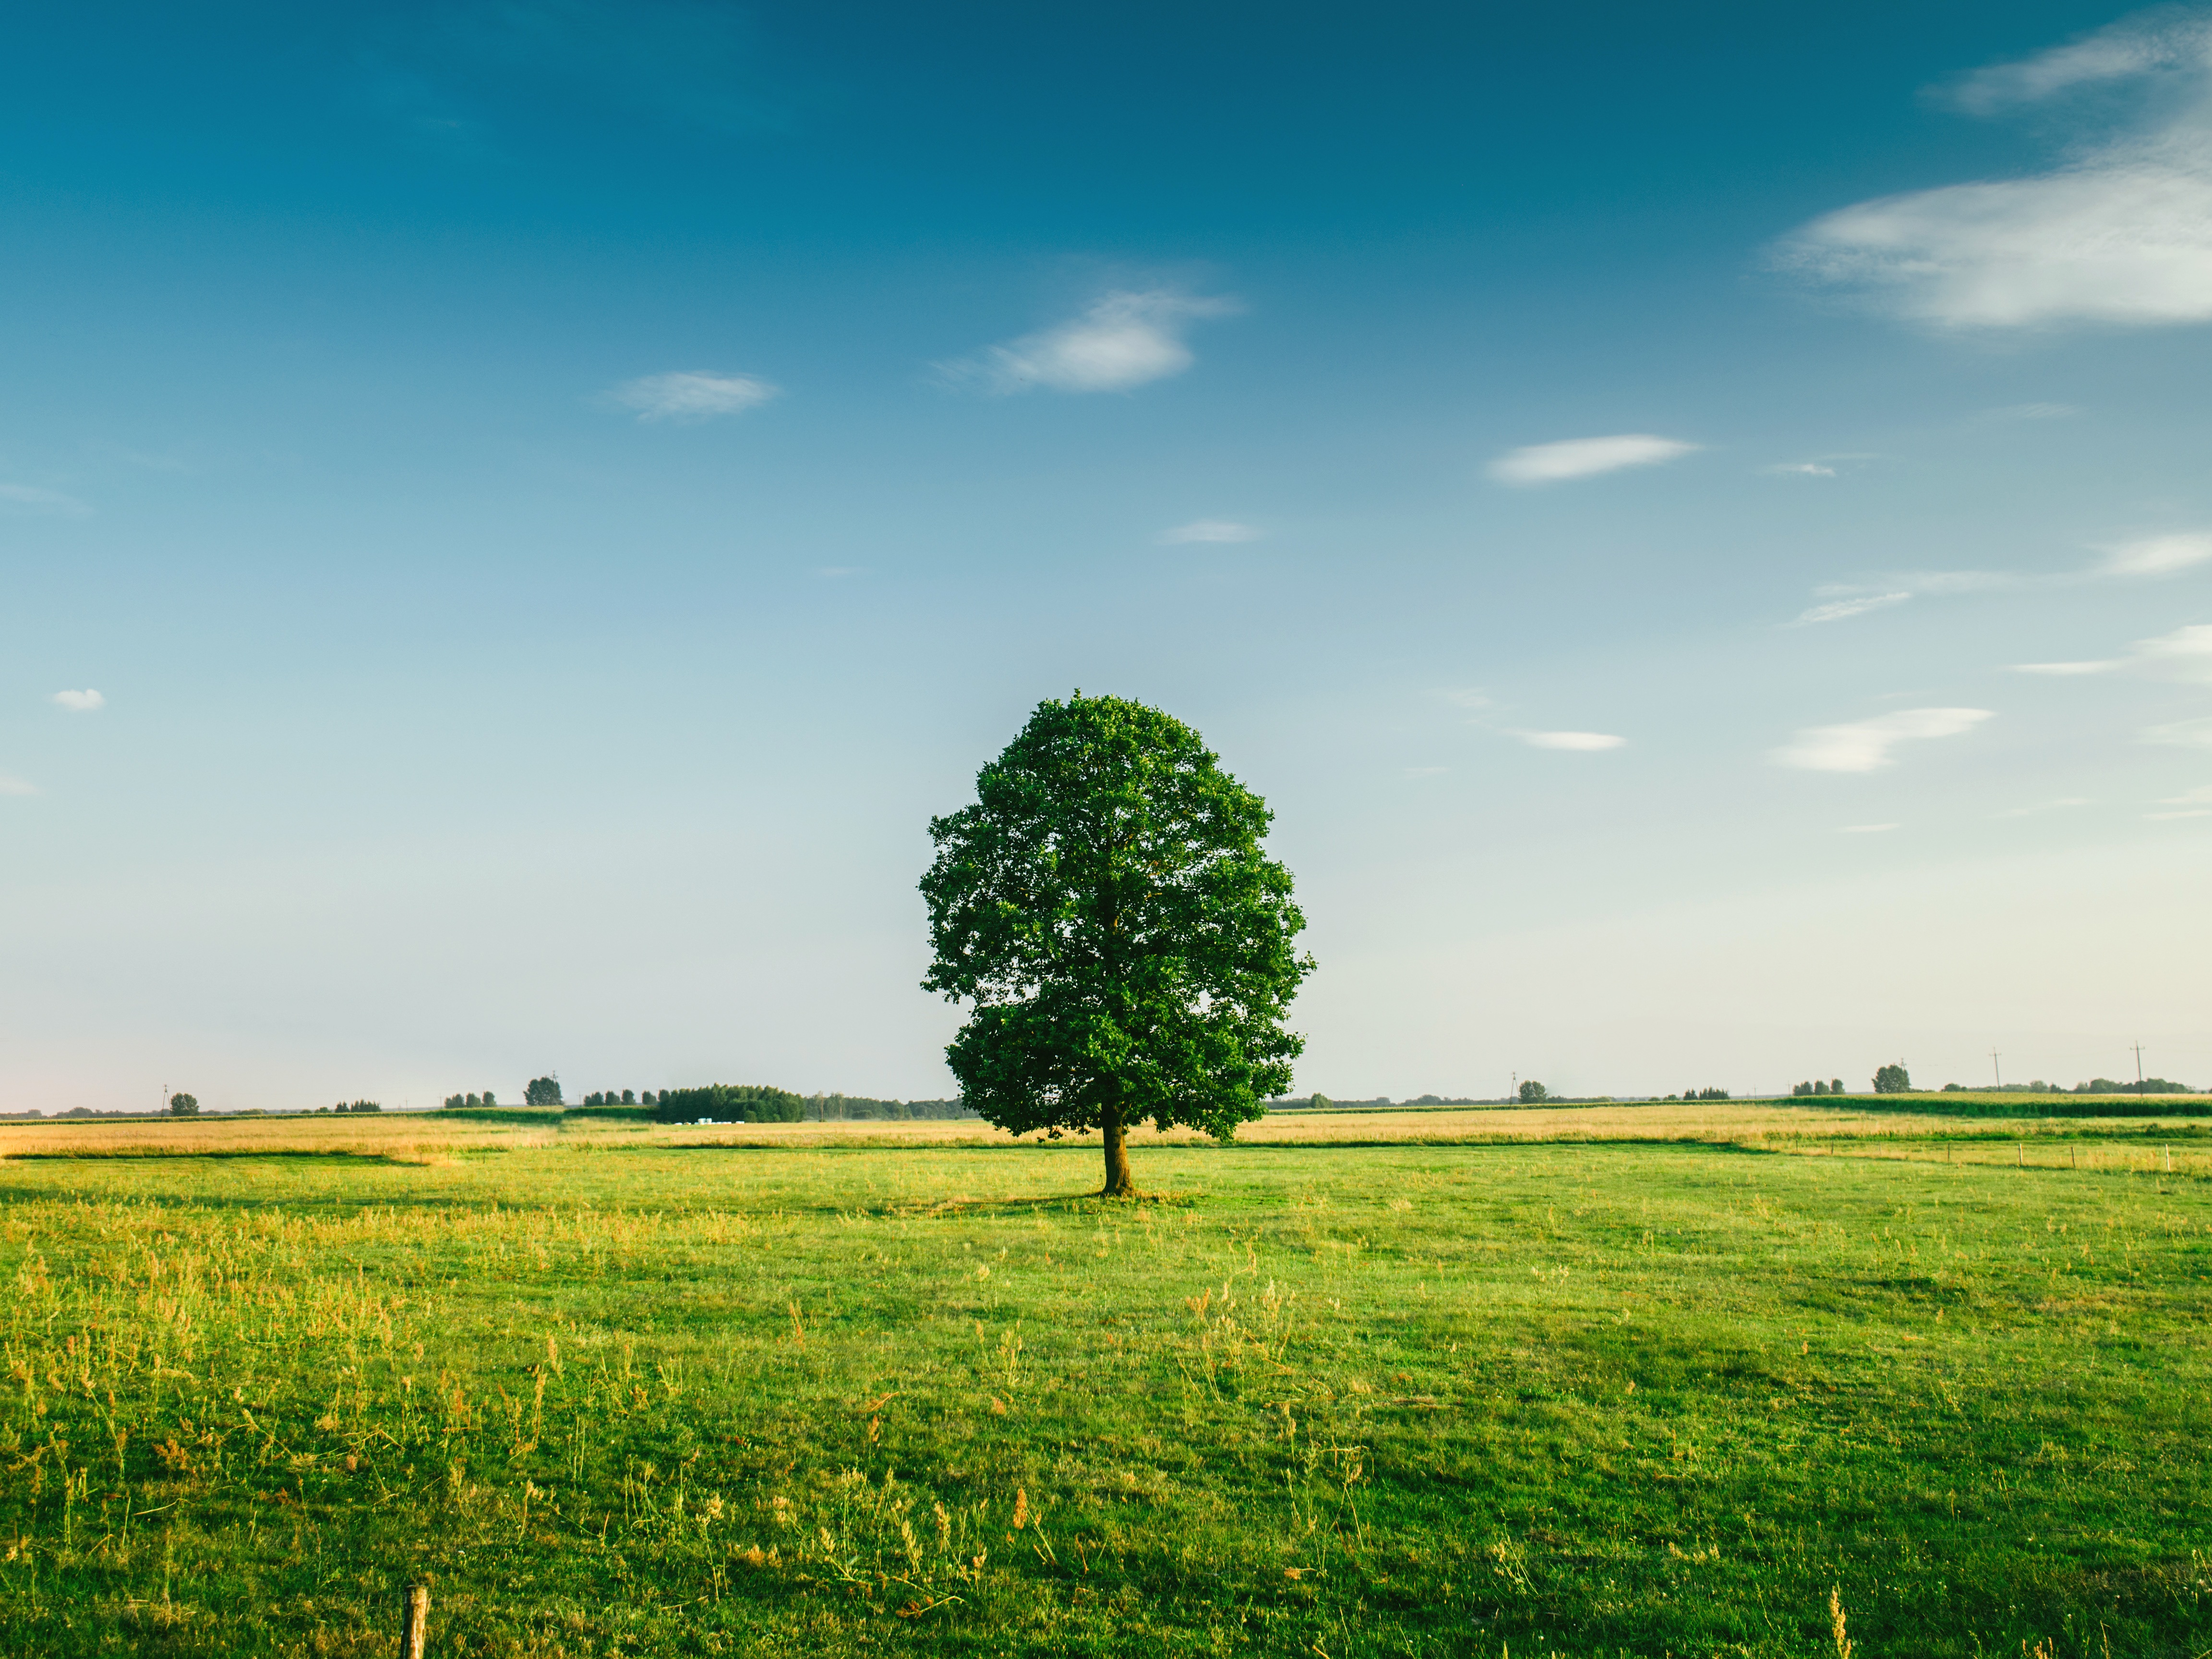 A green field with a lone tree